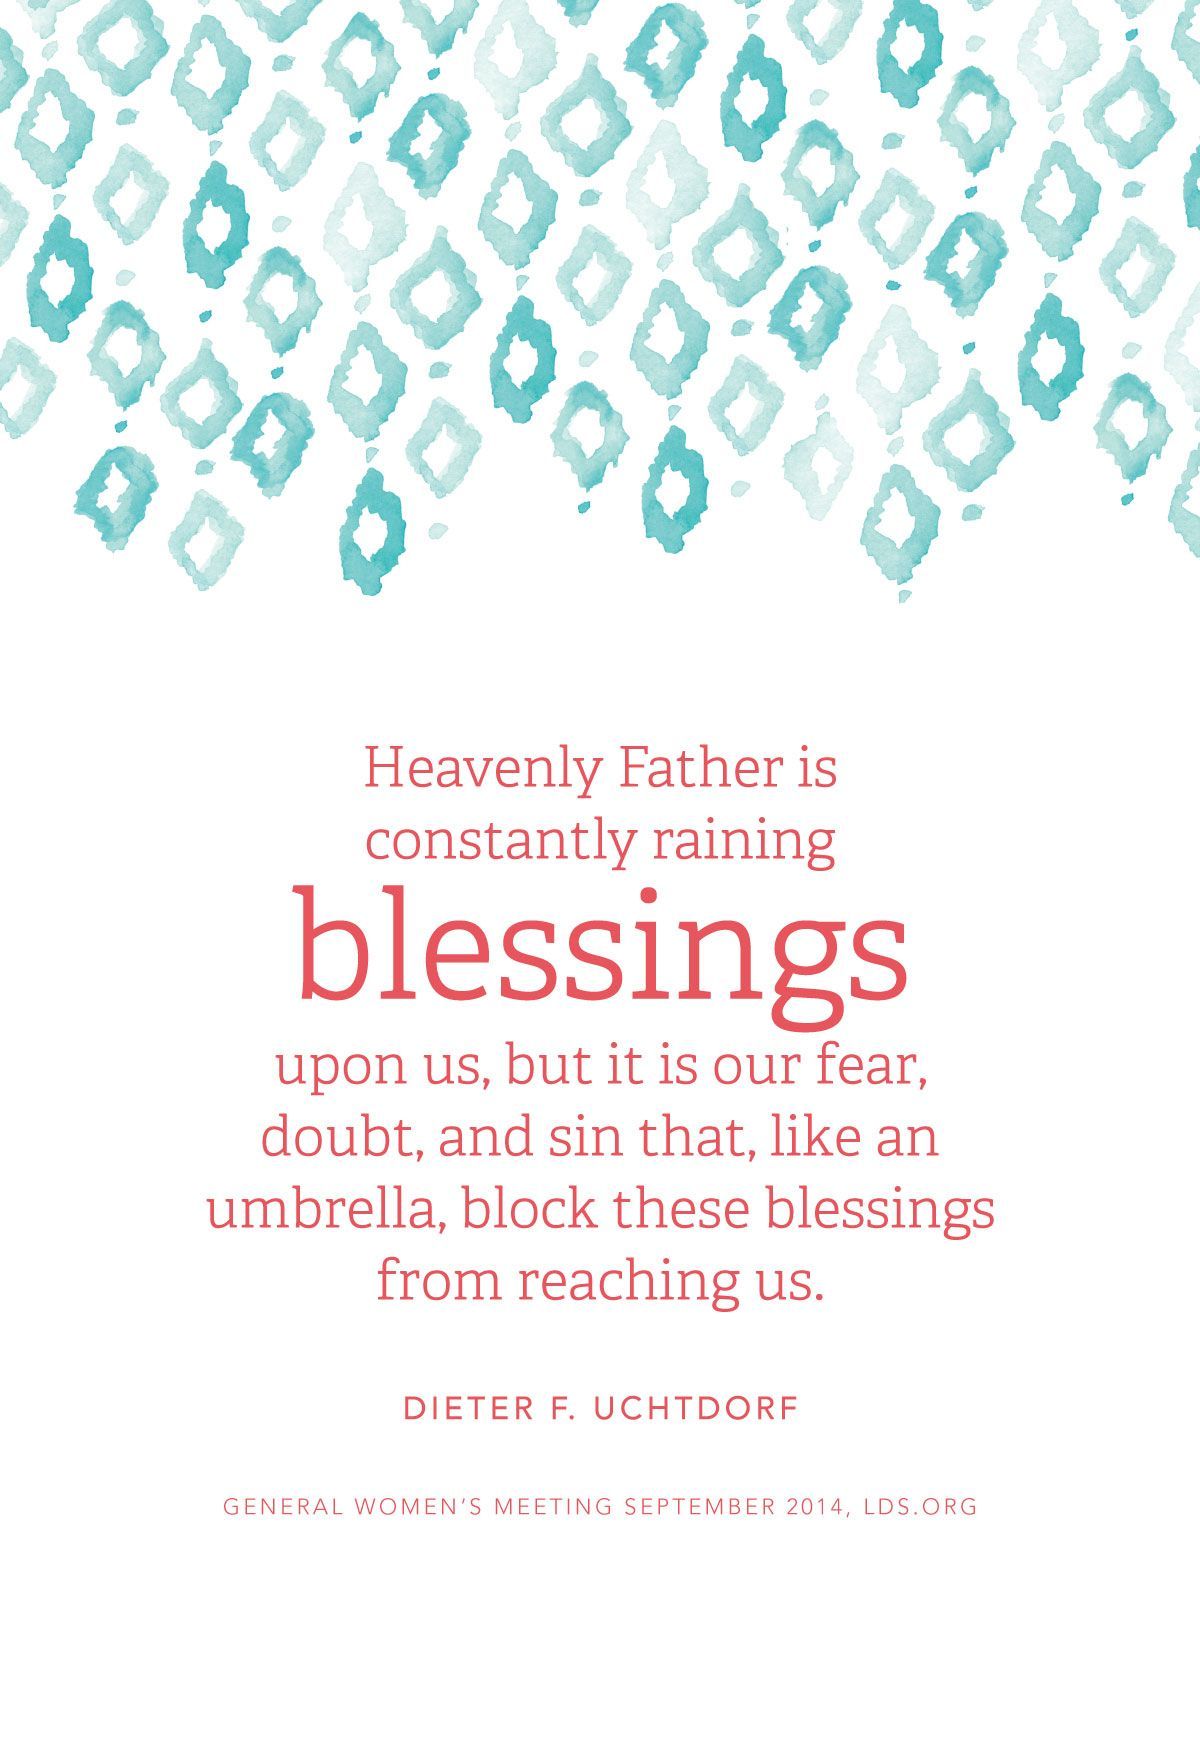 “Heavenly Father is constantly raining blessings upon us, but it is our fear, doubt, and sin that, like an umbrella, block these